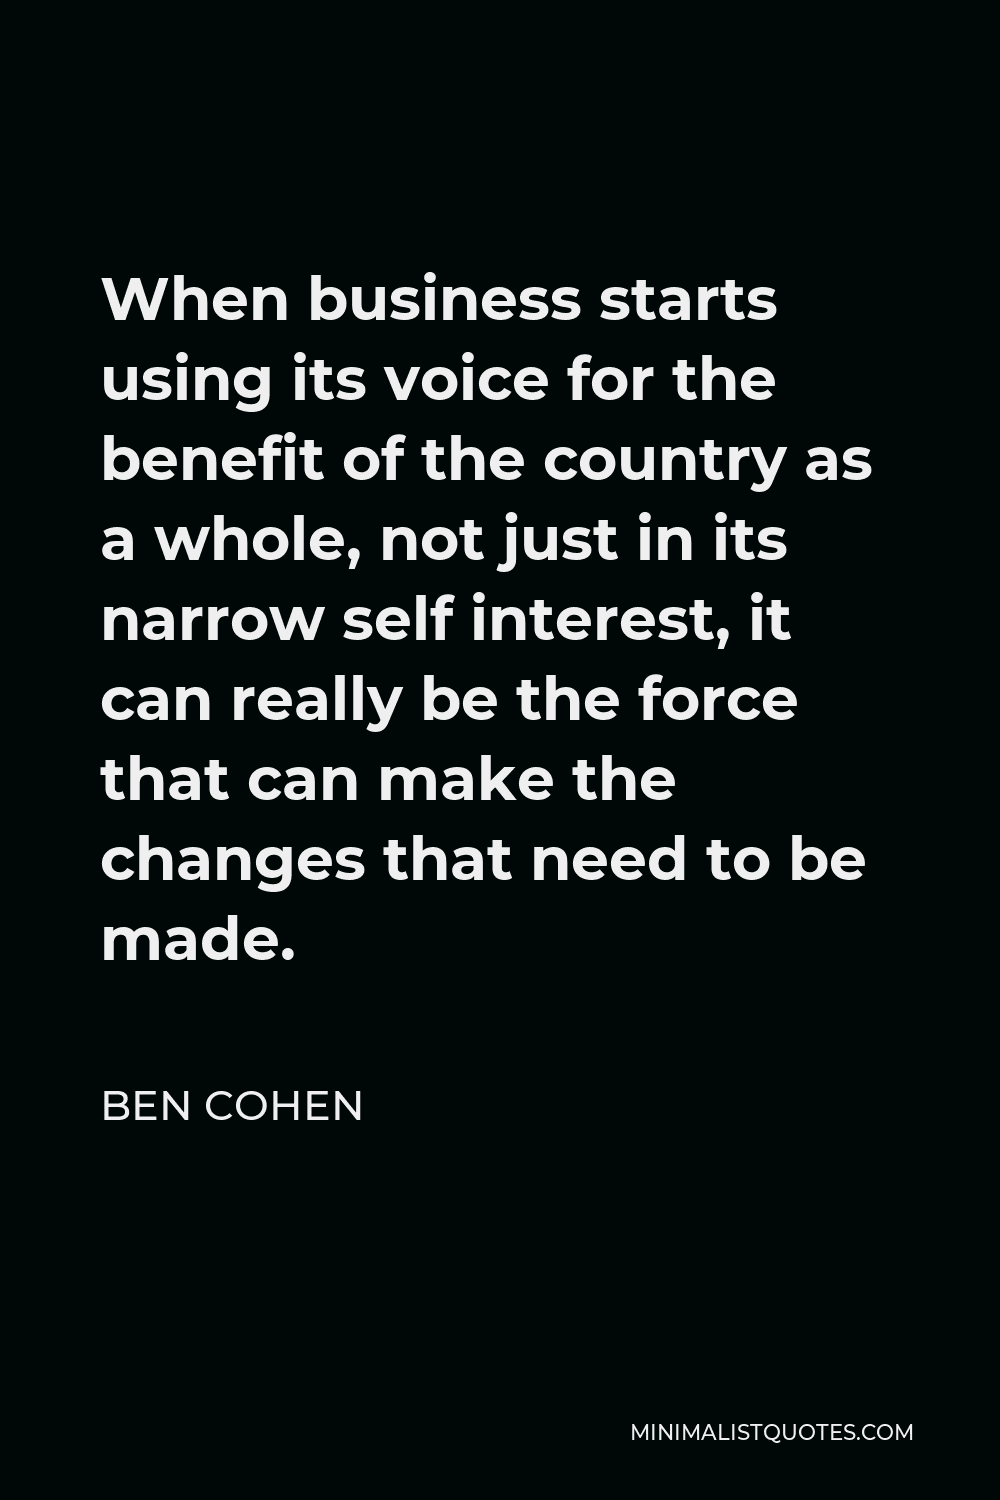 Ben Cohen Quote - When business starts using its voice for the benefit of the country as a whole, not just in its narrow self interest, it can really be the force that can make the changes that need to be made.